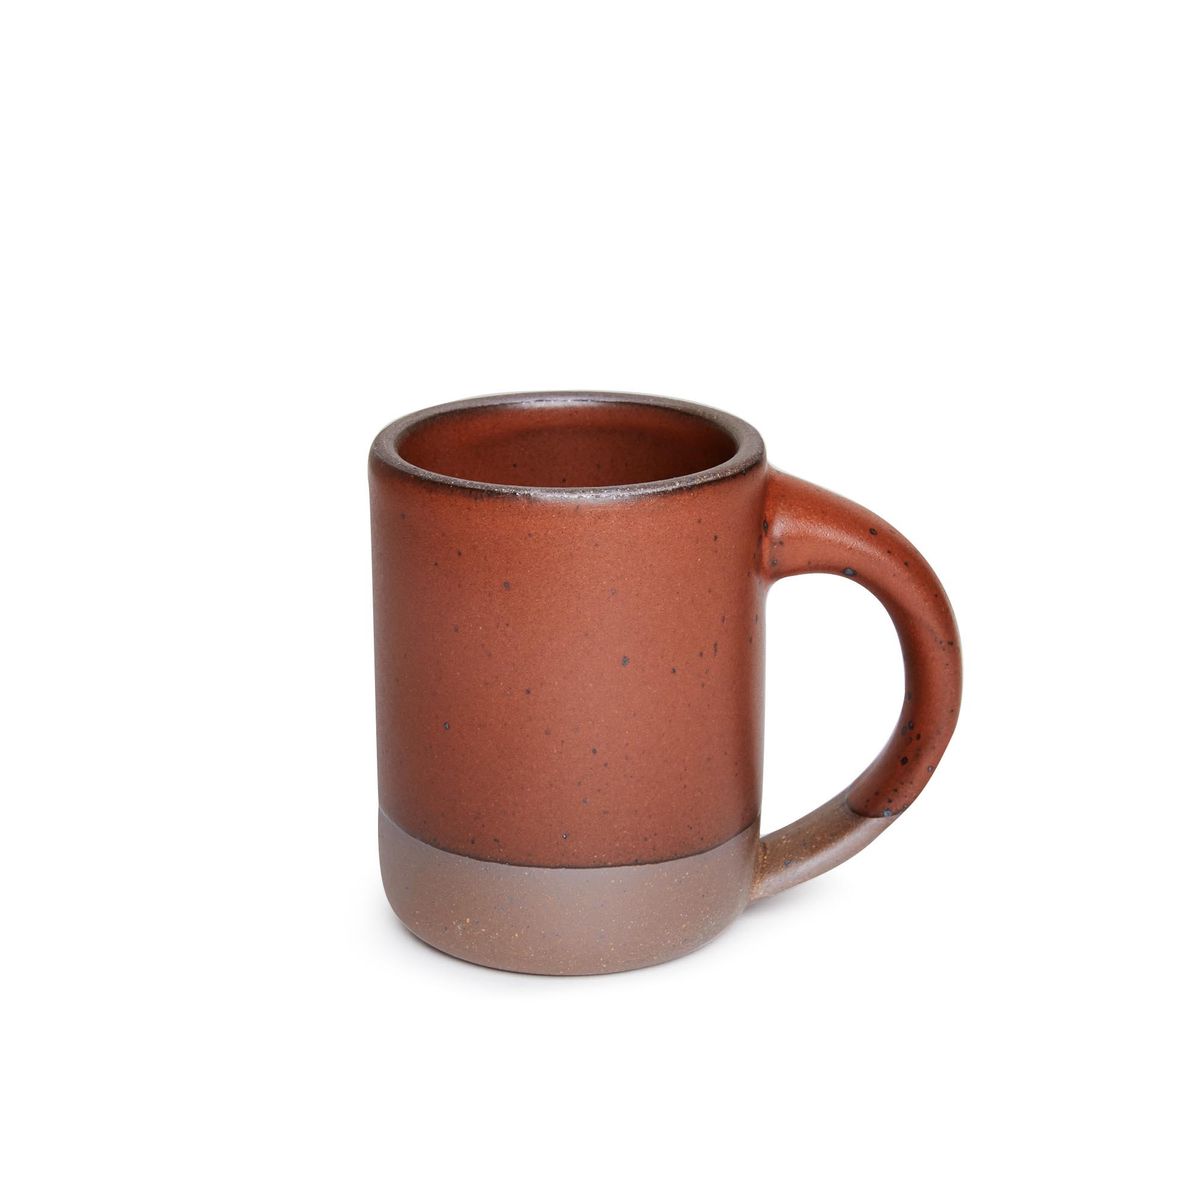 A medium sized ceramic mug with handle in a cool burnt terracotta color featuring iron speckles and unglazed rim and bottom base.